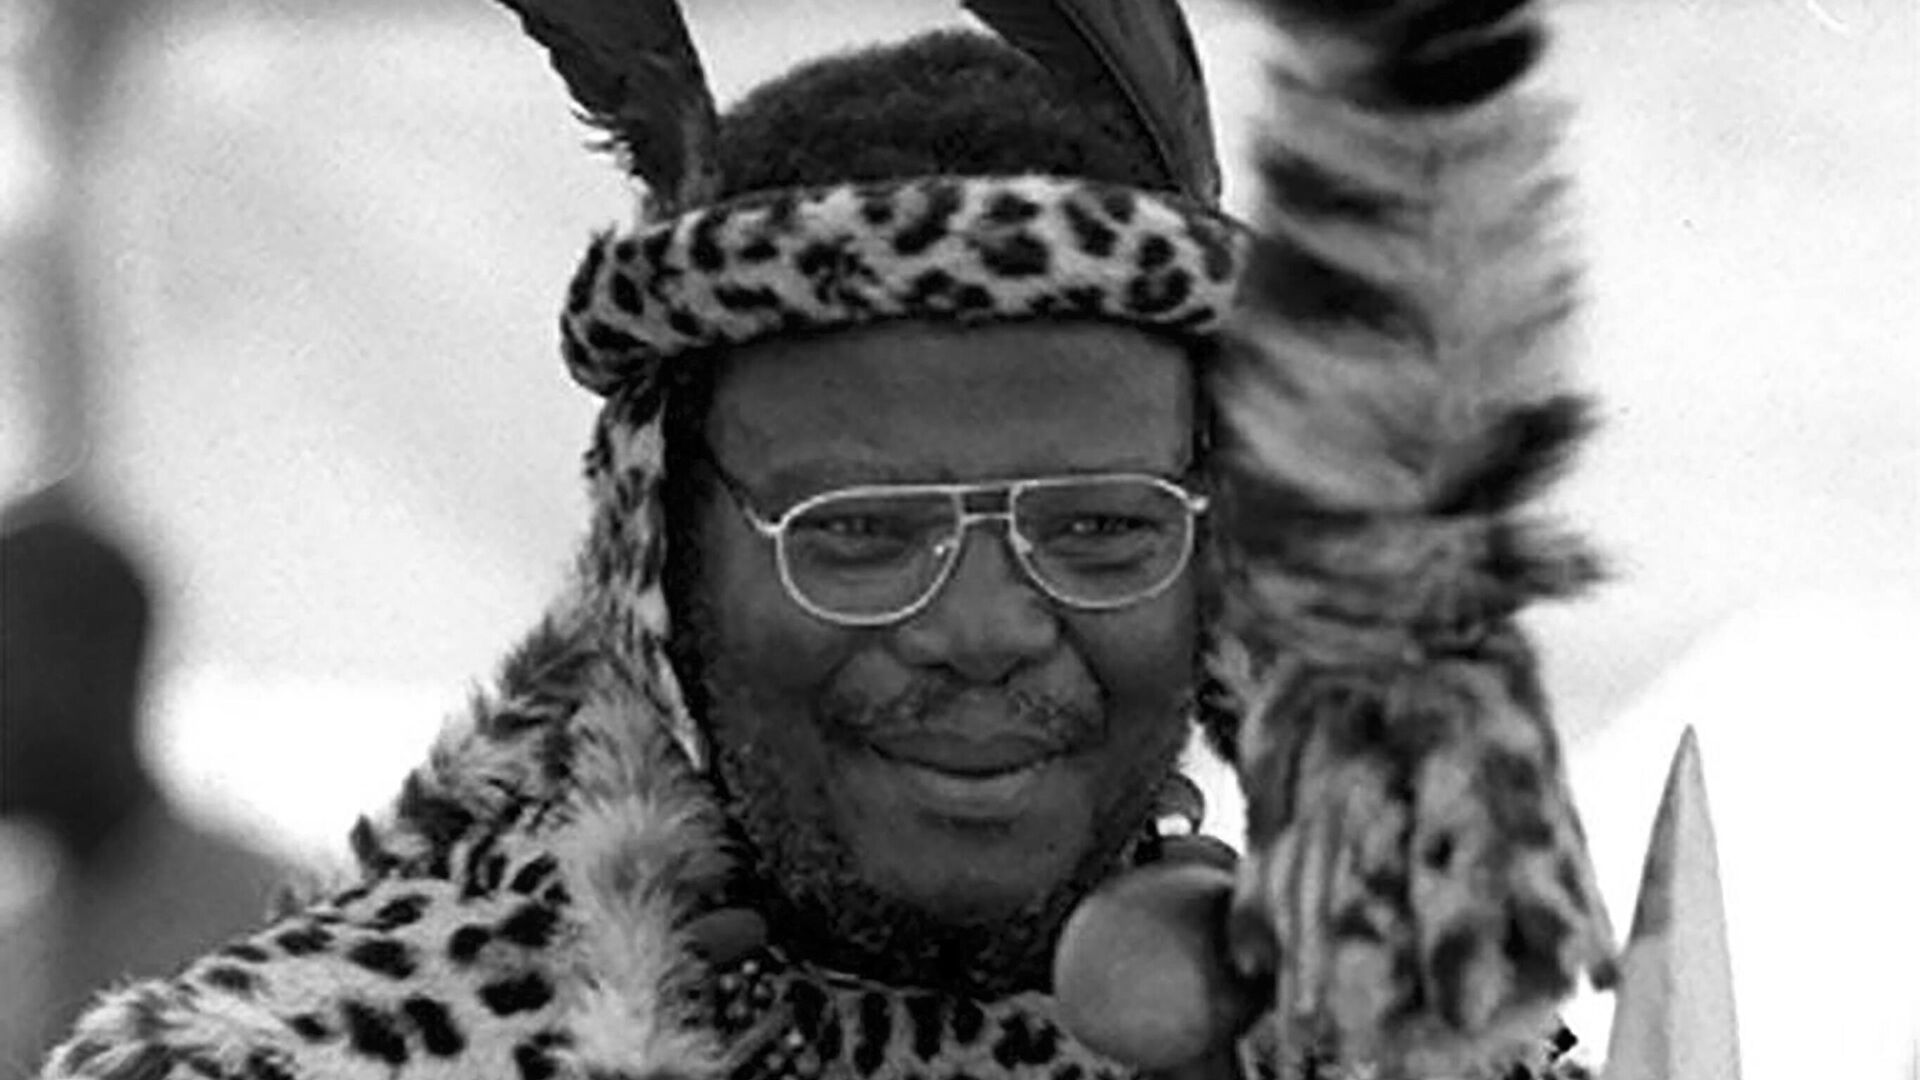 South African politician and traditional minister of South Africa's large Zulu ethnic group, Prince Mangosuthu Buthelezi, in traditional dress March 26, 2009 - Sputnik Africa, 1920, 09.09.2023